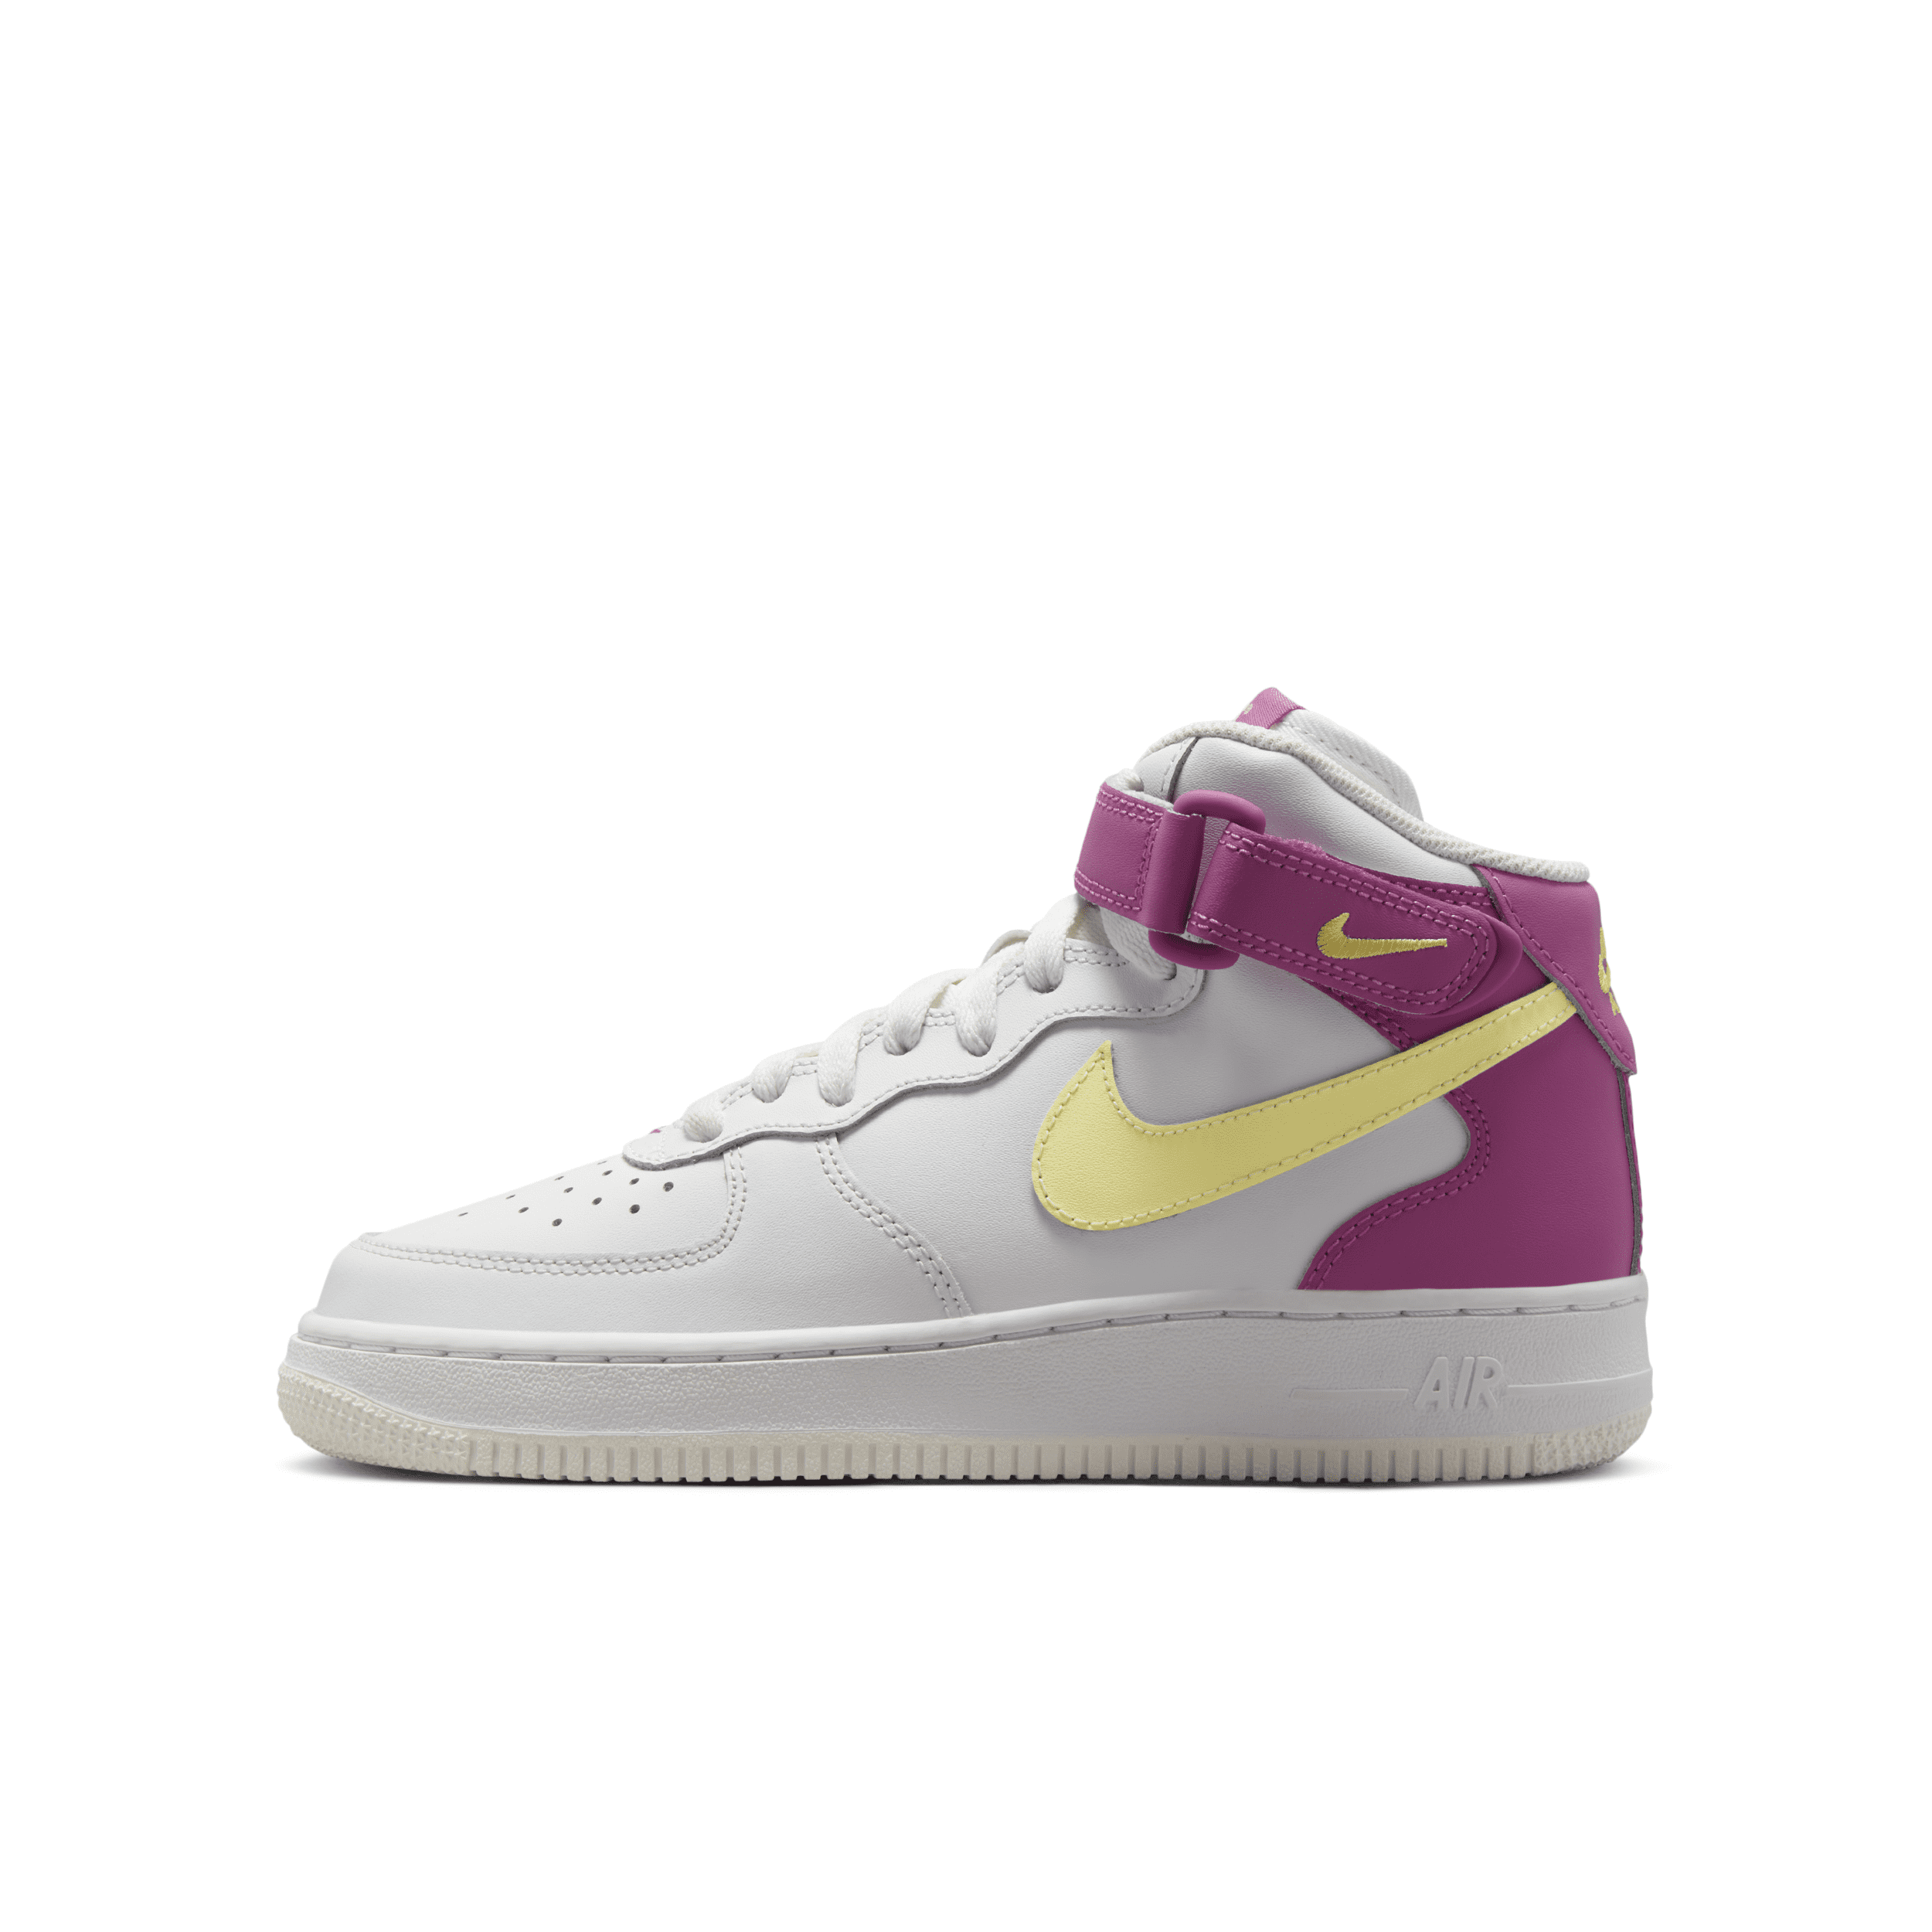 Mainstream Panorama Plantage Nike Air Force 1 Mid Le Big Kids' Shoes In Summit White/citron Tint/cosmic  Fuchsia/white | ModeSens